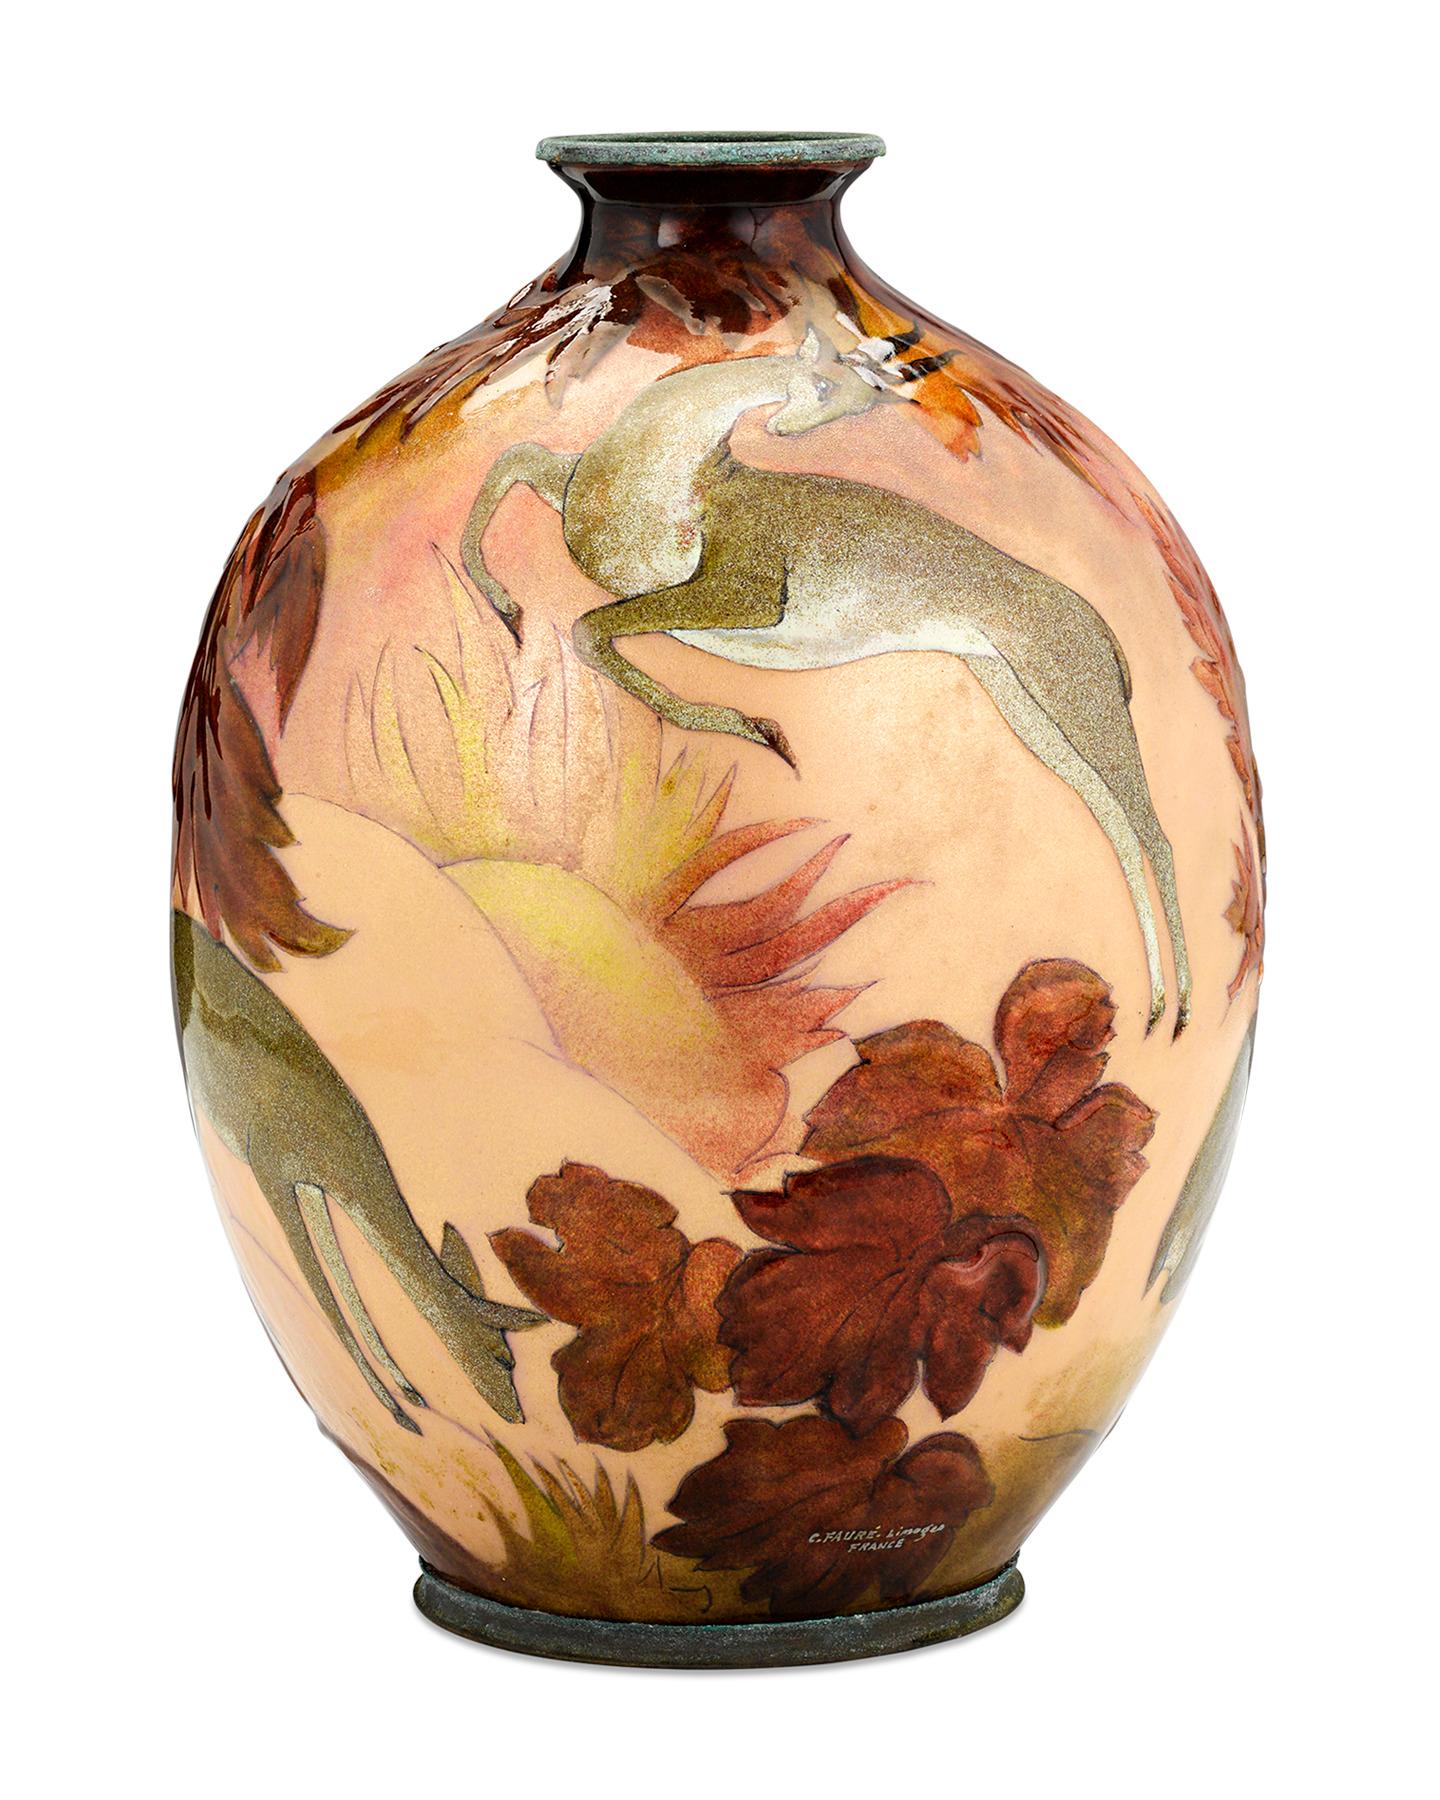 A group of graceful deer are the subject of this charming enamel on copper vase by famed French decorative artist, Camille Fauré. The deer sit against a backdrop of a forest in autumn, highlighting Fauré's deep appreciation for nature which is